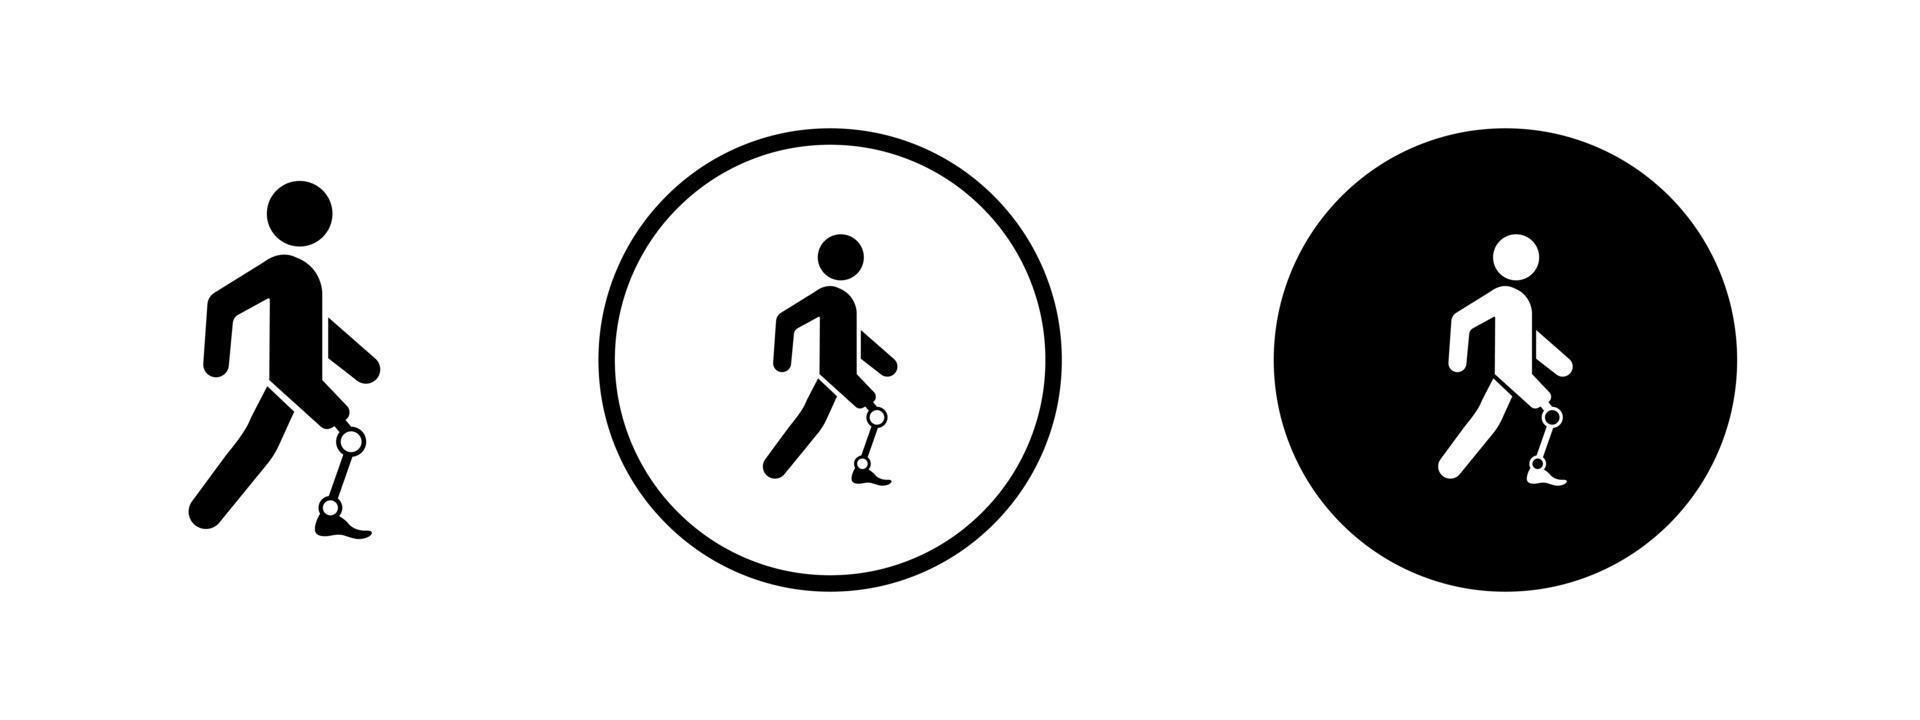 A man with a prosthesis. A disabled person with a prosthesis. A simple icon. Vector. vector